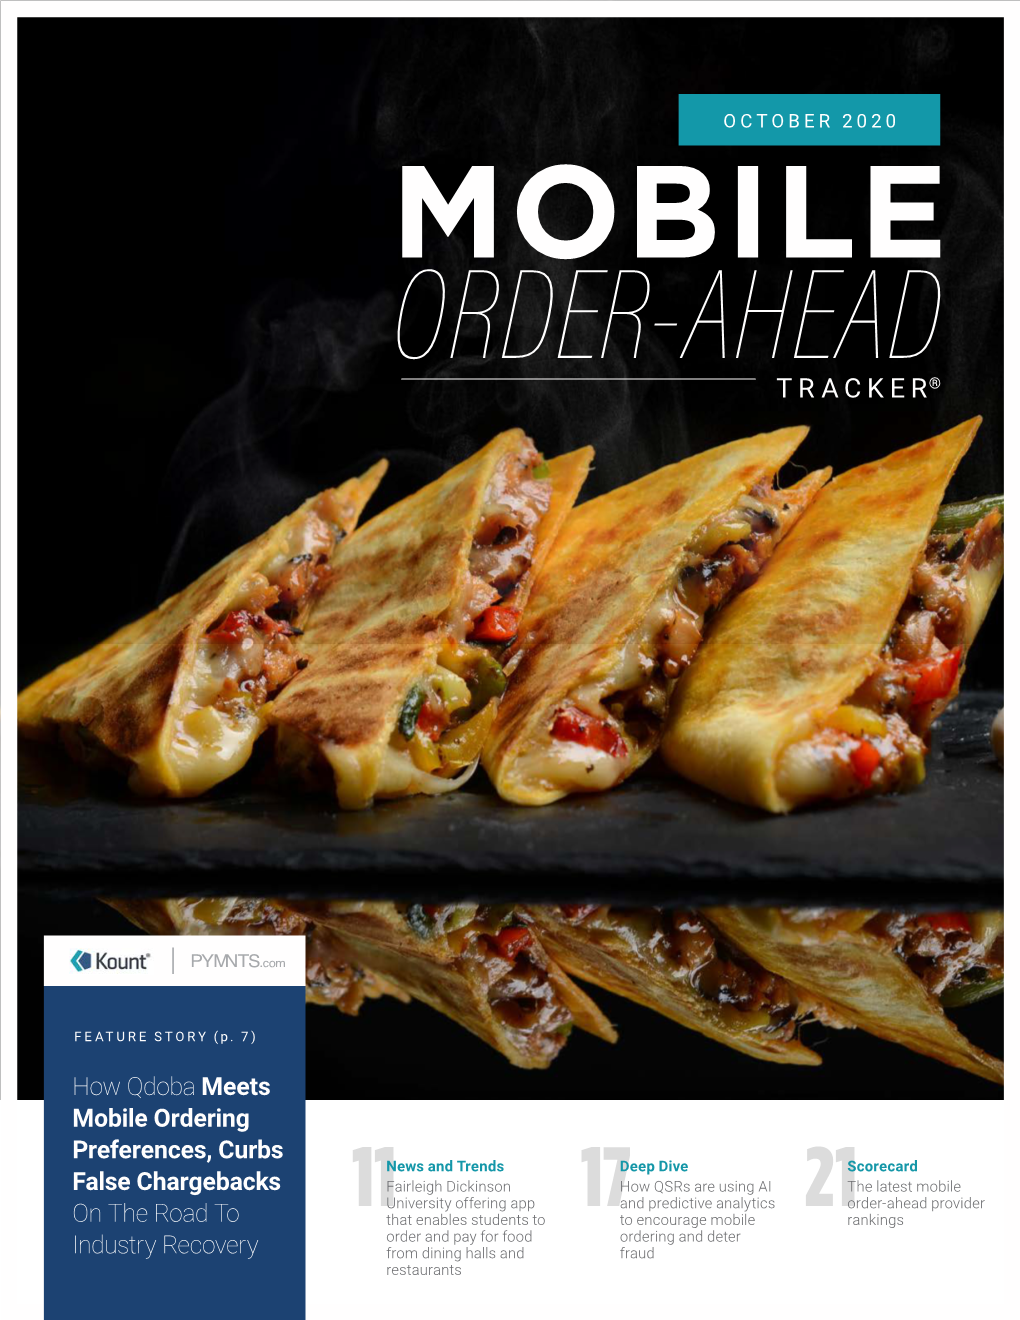 How Qdoba Meets Mobile Ordering Preferences, Curbs False Chargebacks on the Road to Industry Recovery